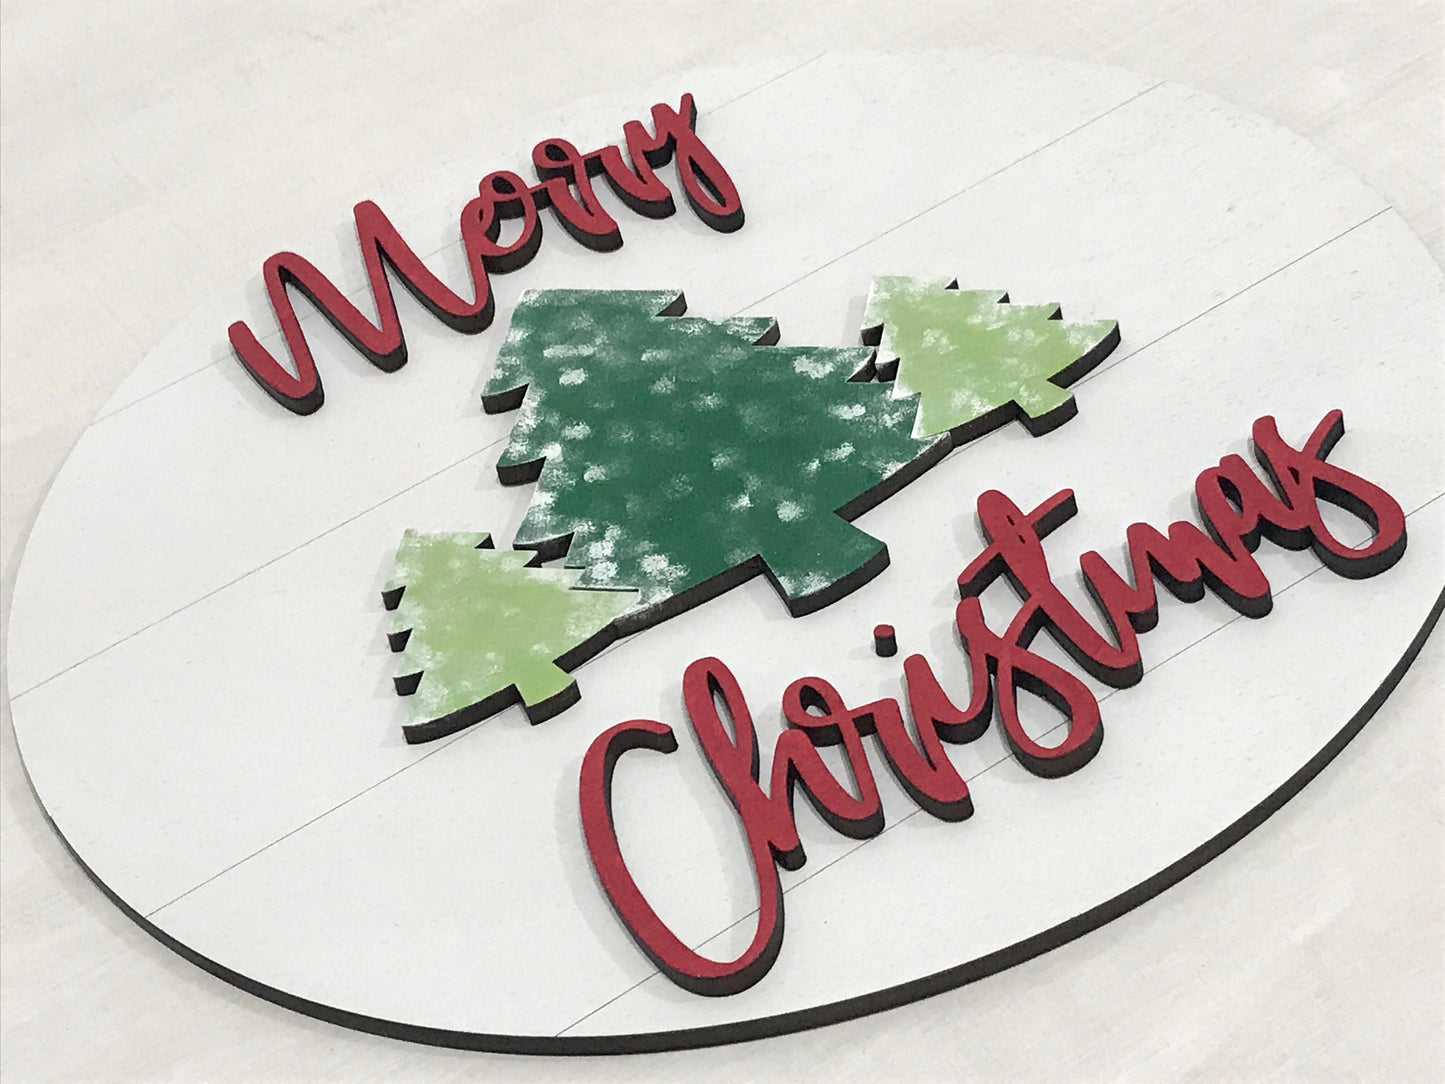 Merry Christmas sign kit, DIY holiday crafts, winter sign making supplies, evergreen trees kids craft project ideas, paint party sign bundle